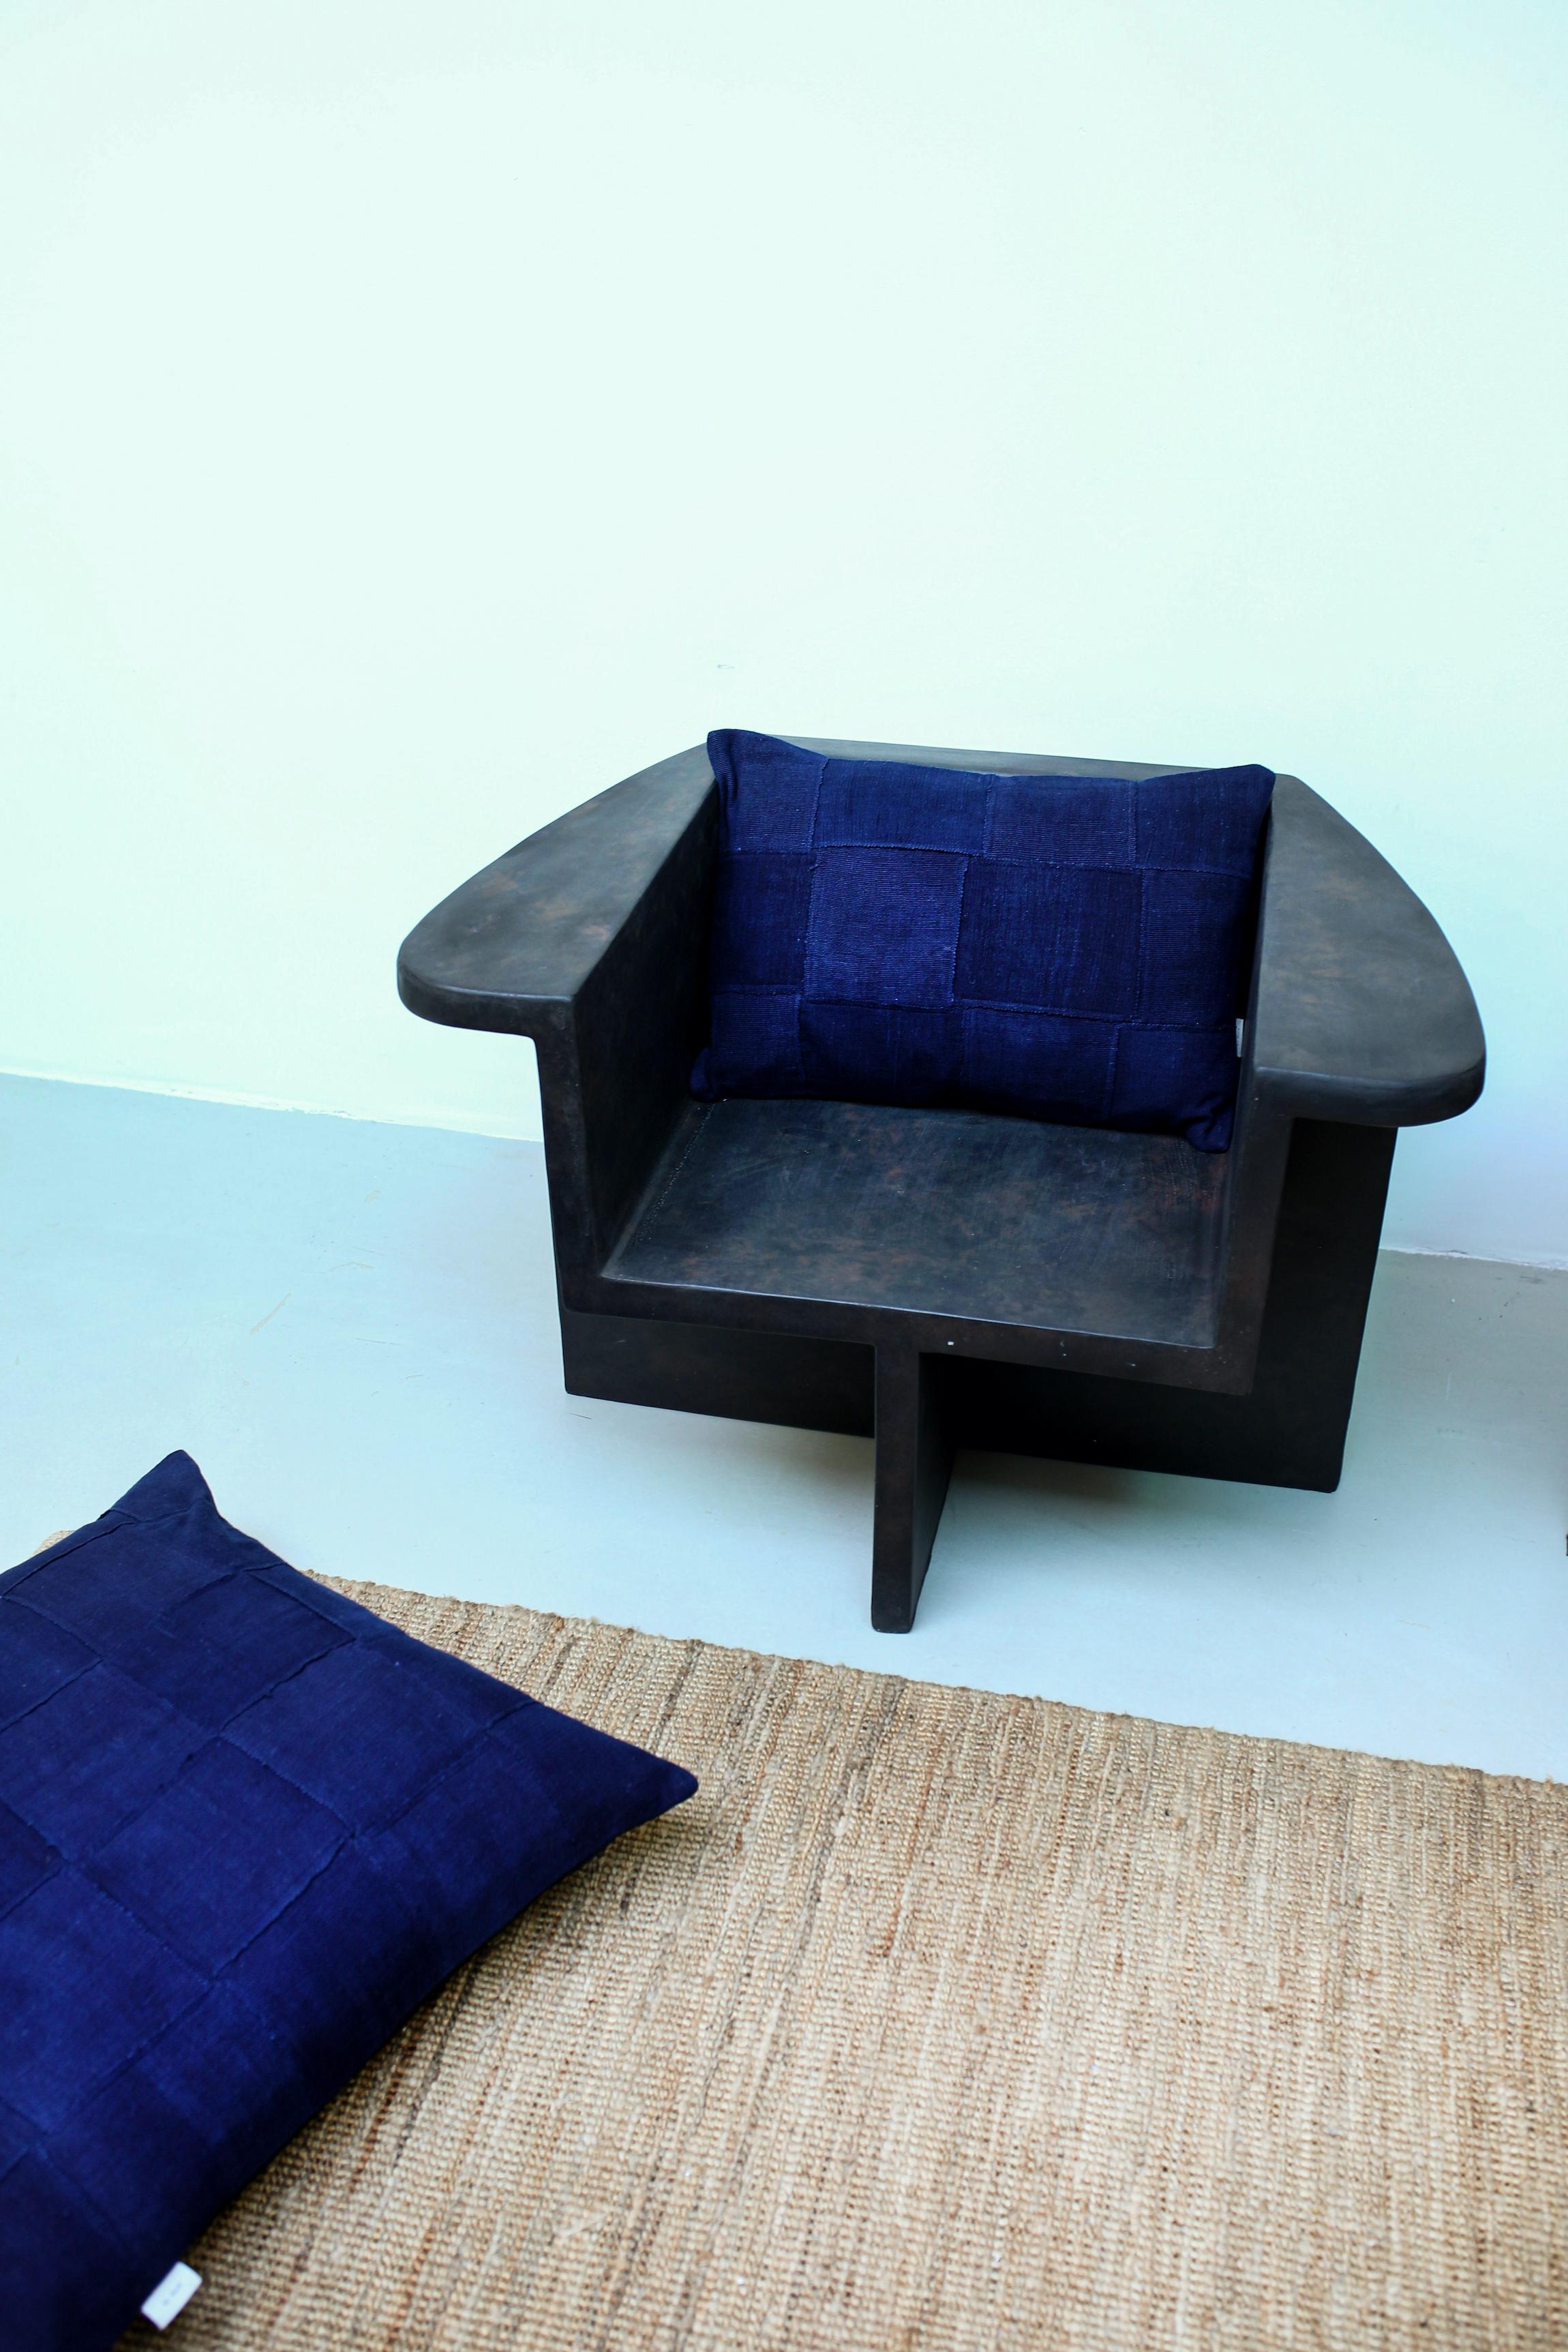 This Indigo glue fabric is handwoven and plant-dyed in the Dogon region of Mali. The cotton is traditionally handpicked, spun and woven into small strips, which can still be seen in this cushion. The brown color in this cushion is derived from